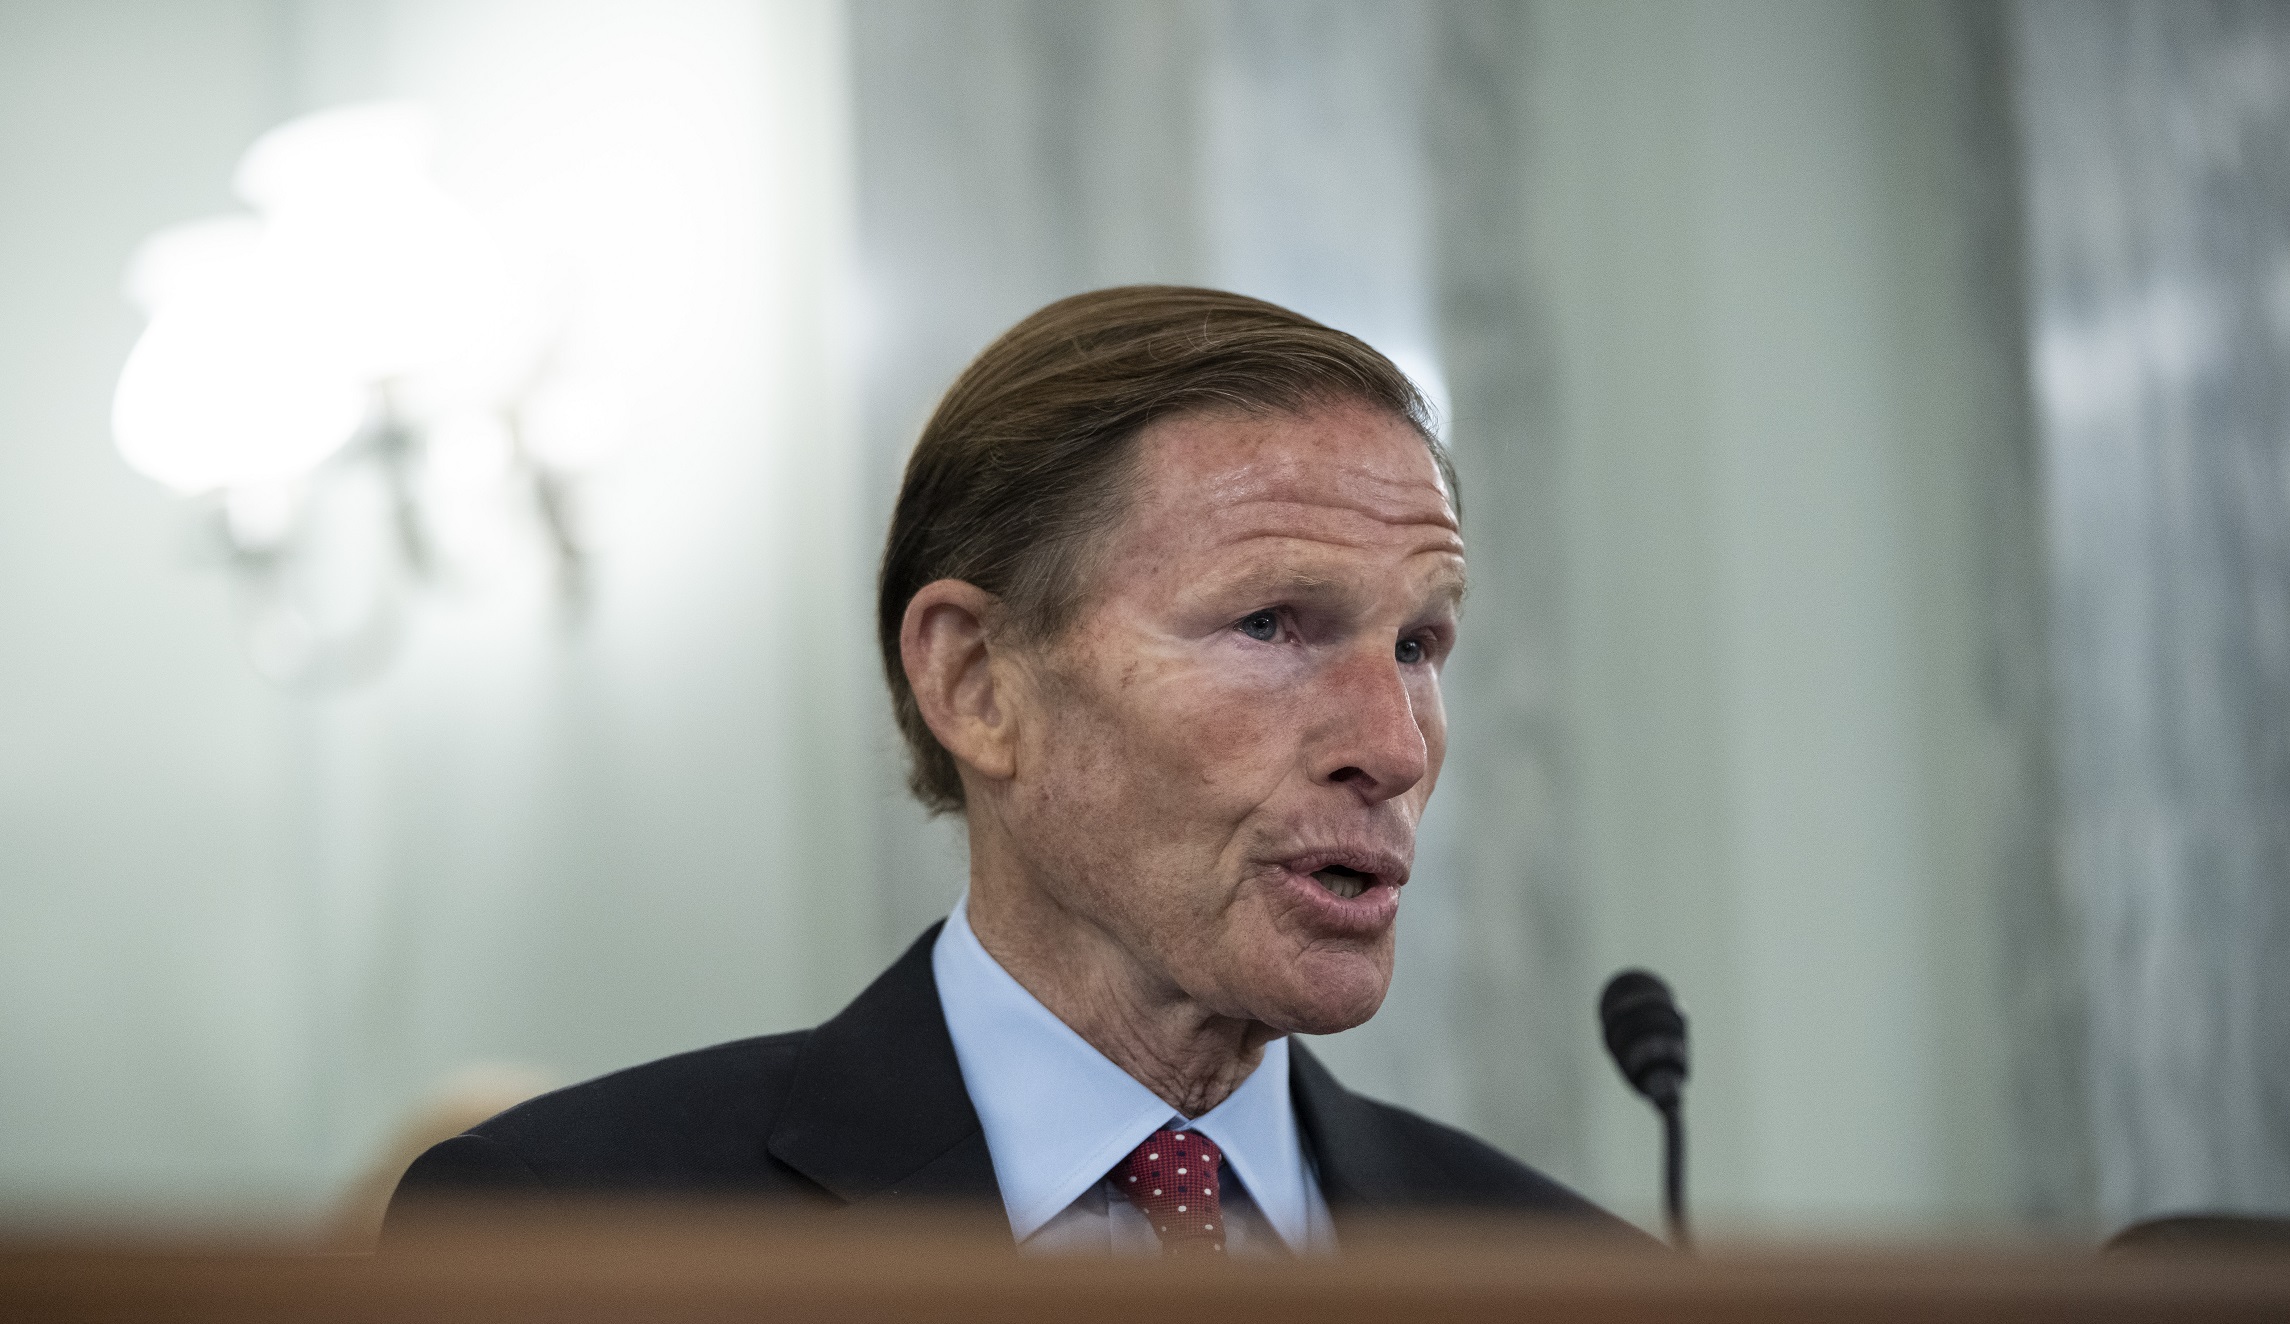 As Sen. Blumenthal stands with communists, will fellow Democrats stand with him? - Washington Examiner